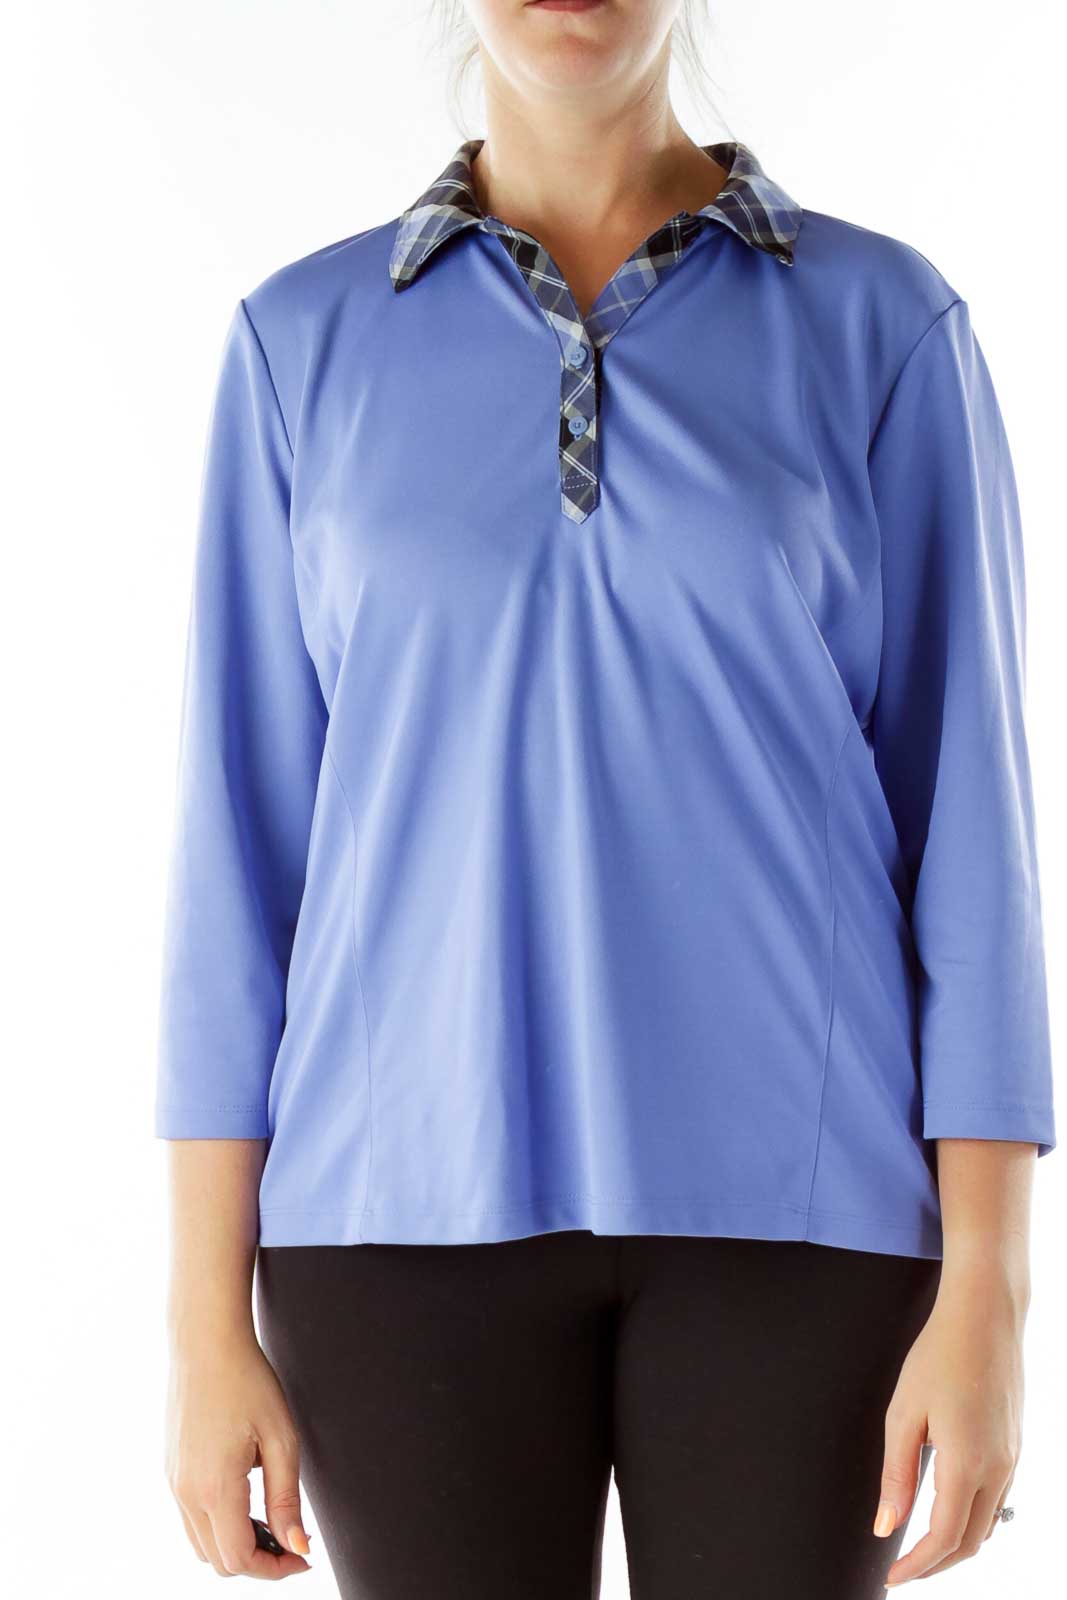 Blue Plaid Collared Sports Top Front